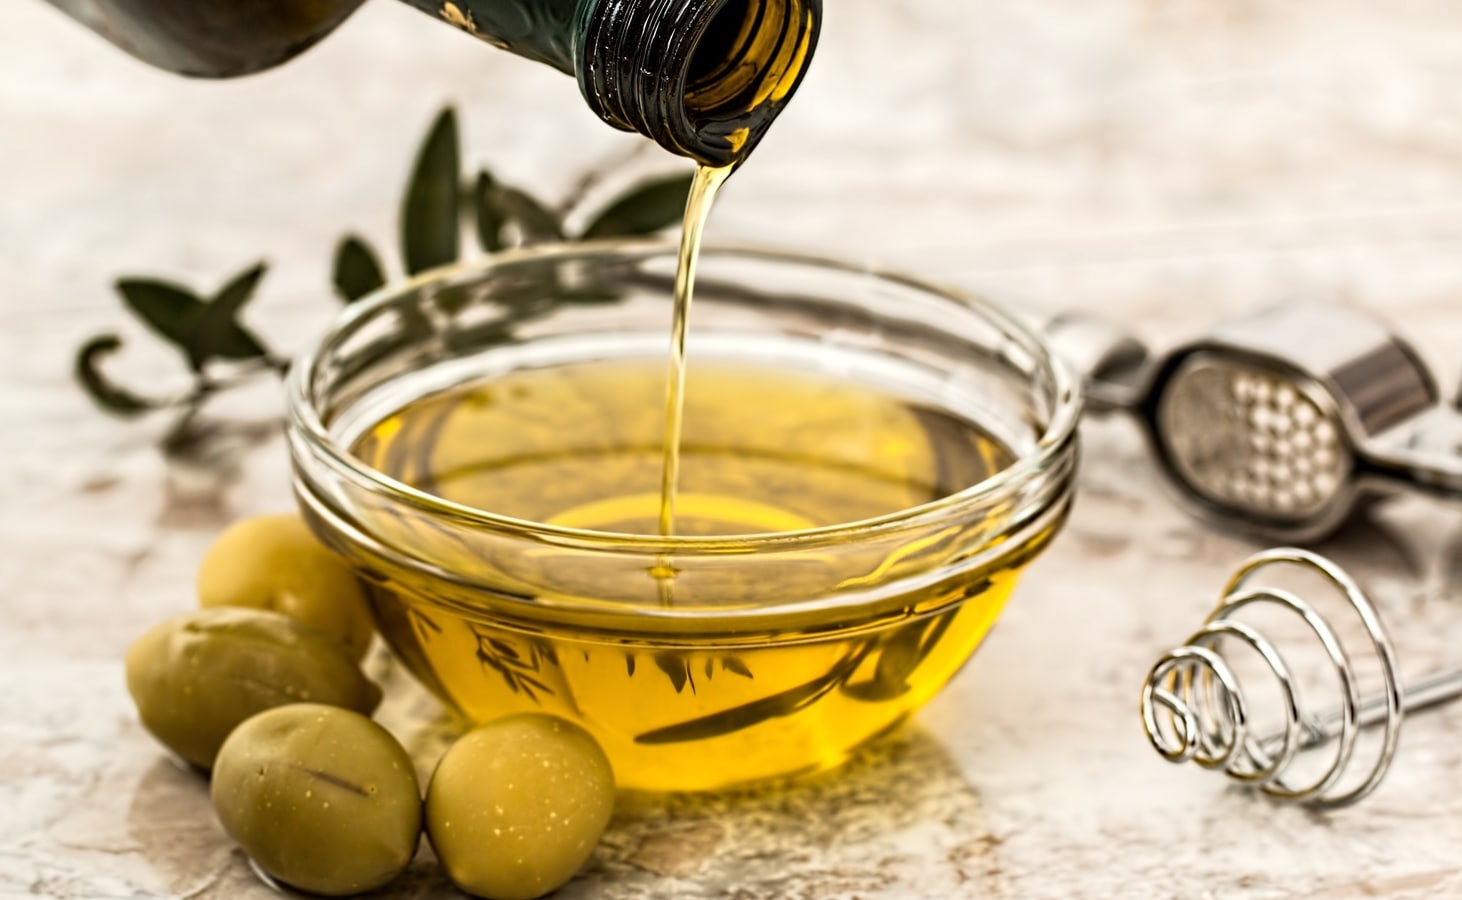 Olive oil for hair: It promotes hair growth and smoothens strands